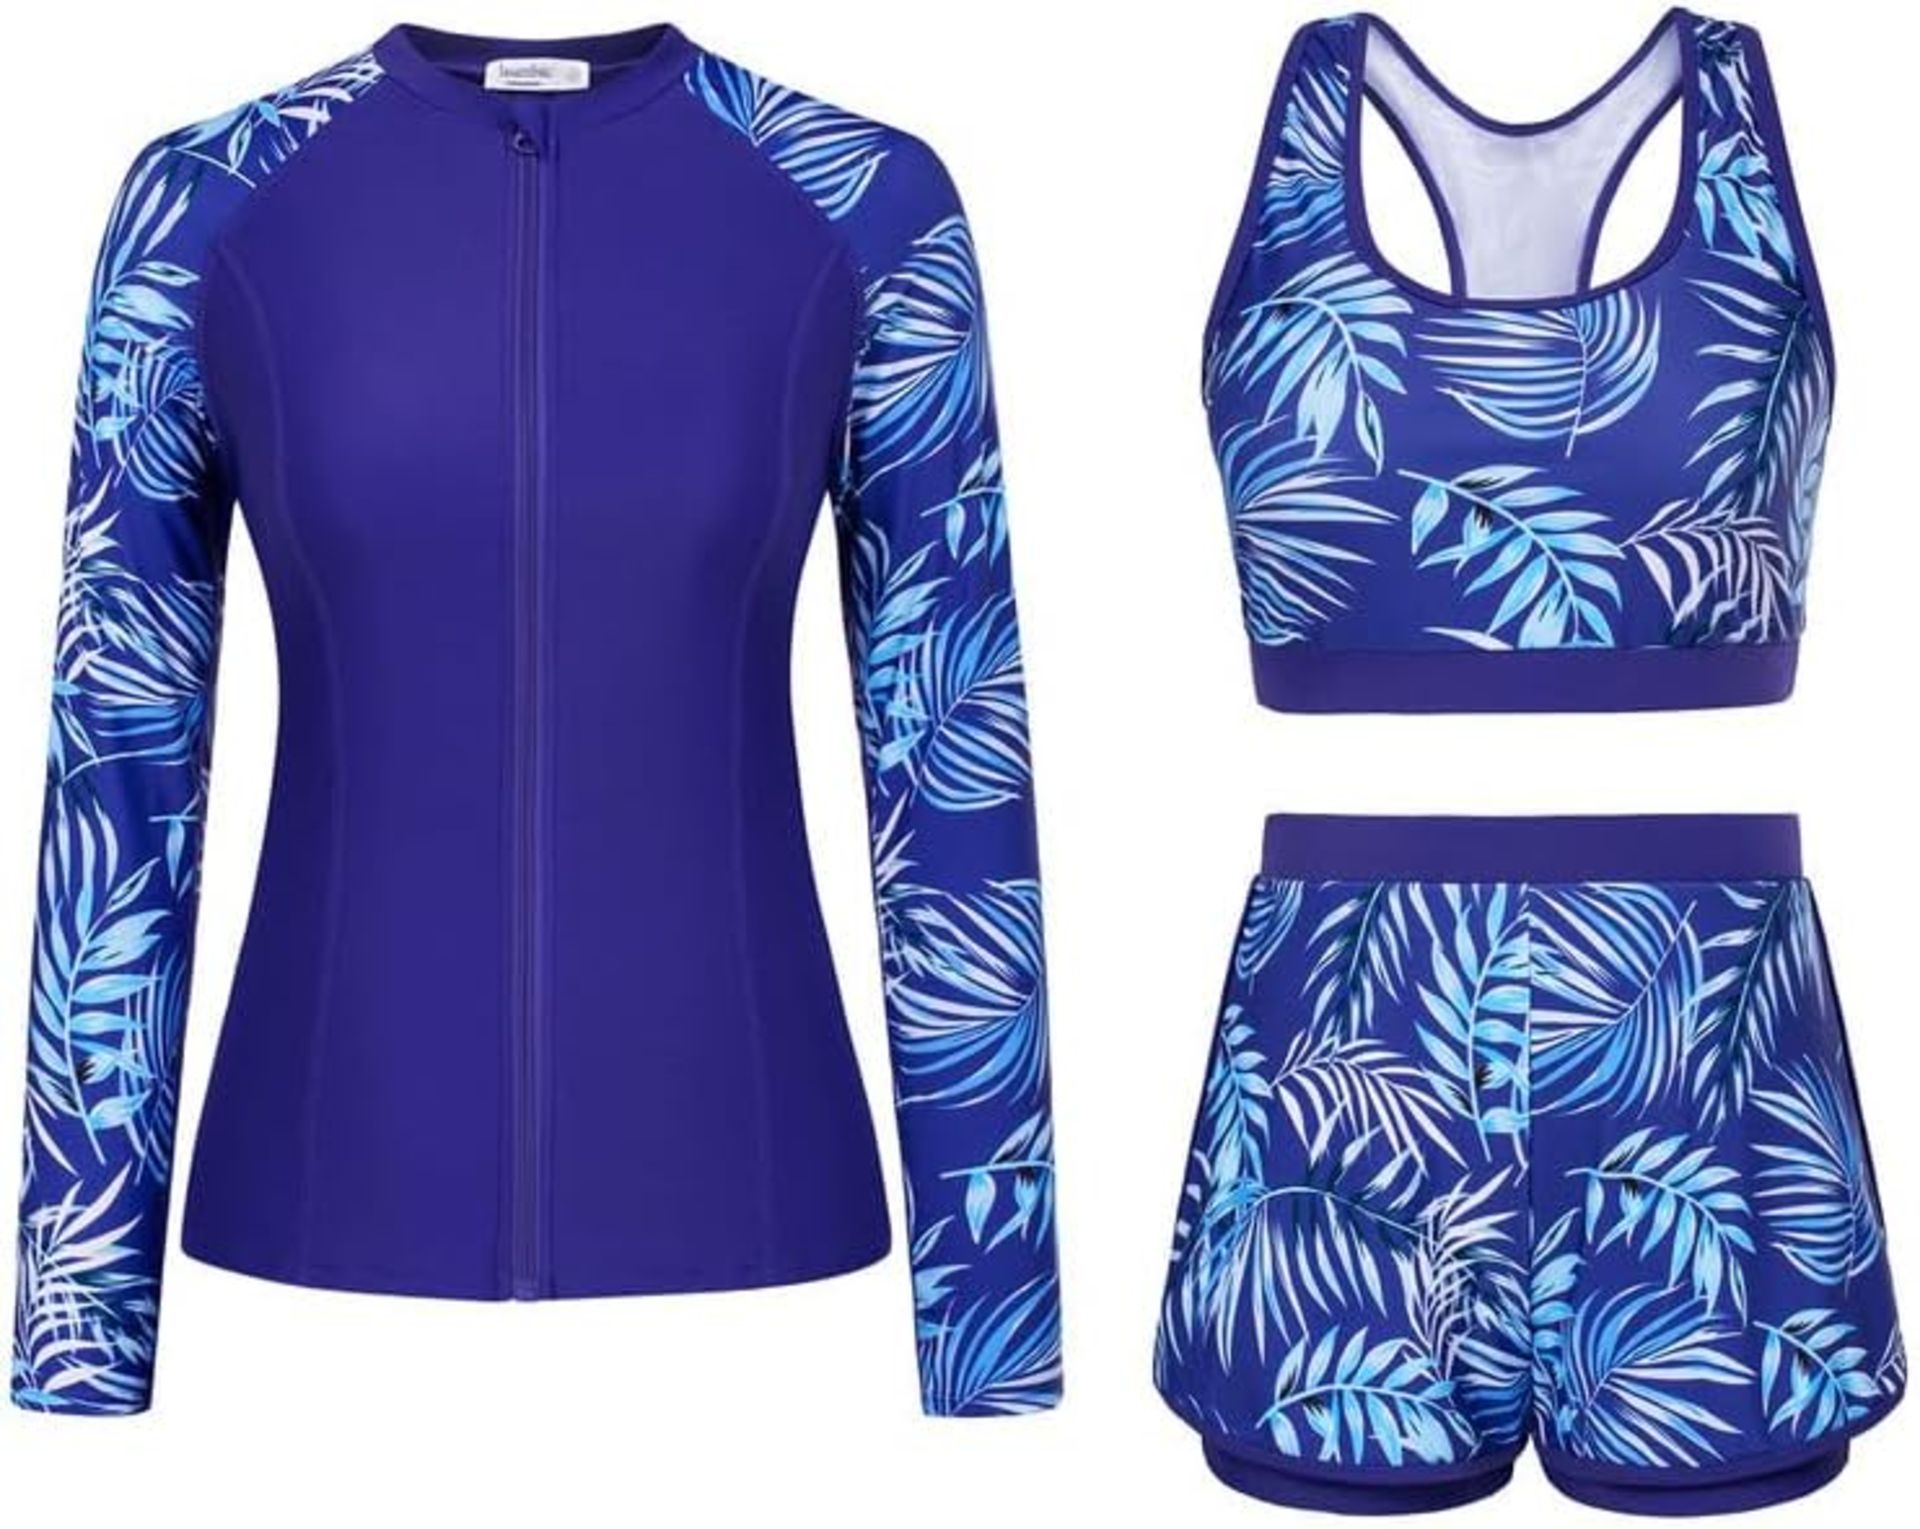 Approx RRP £1,500 Large Collection (70 Pieces) of JASAMBAC Women's Wear, Swimming Costumes